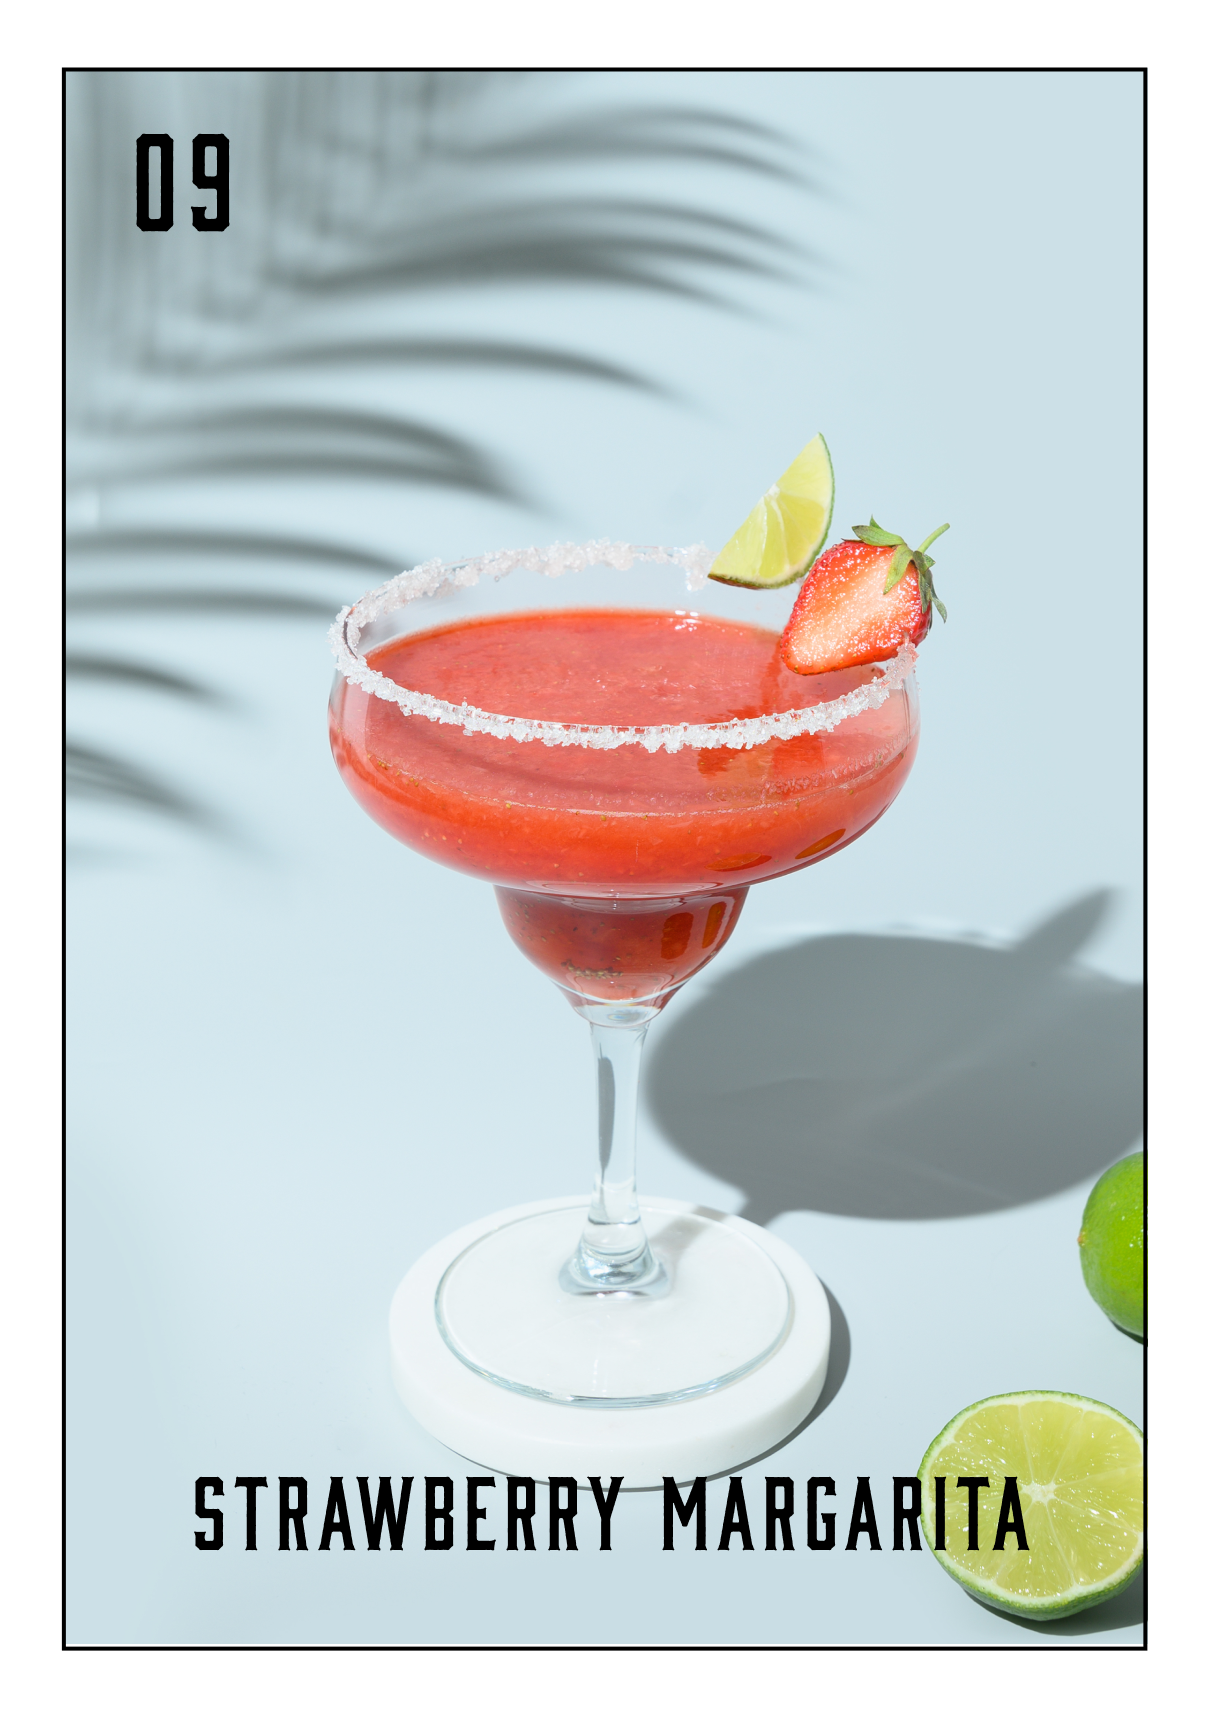 Strawberry margarita made with Divertido Tequila